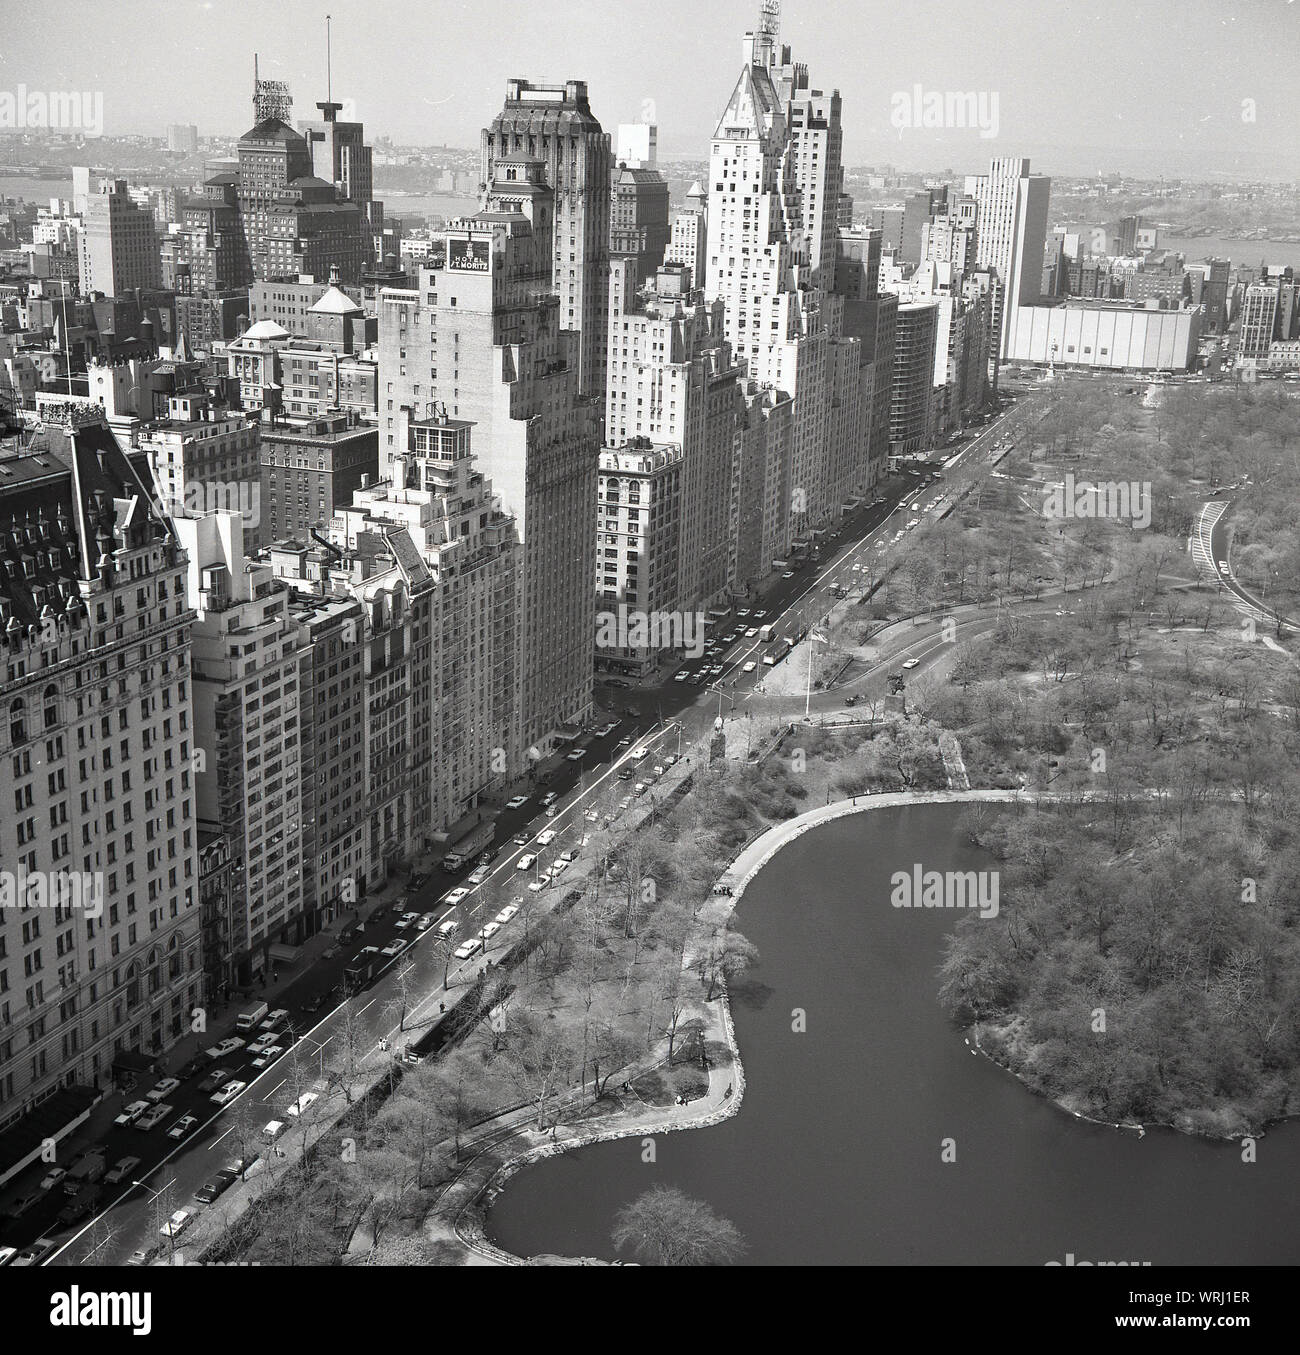 1960s, historical, Manhattan, New York, an aerial view from this era showing the skyscrapers and tower blocks that over look Central Park, the city's large open space. Stock Photo